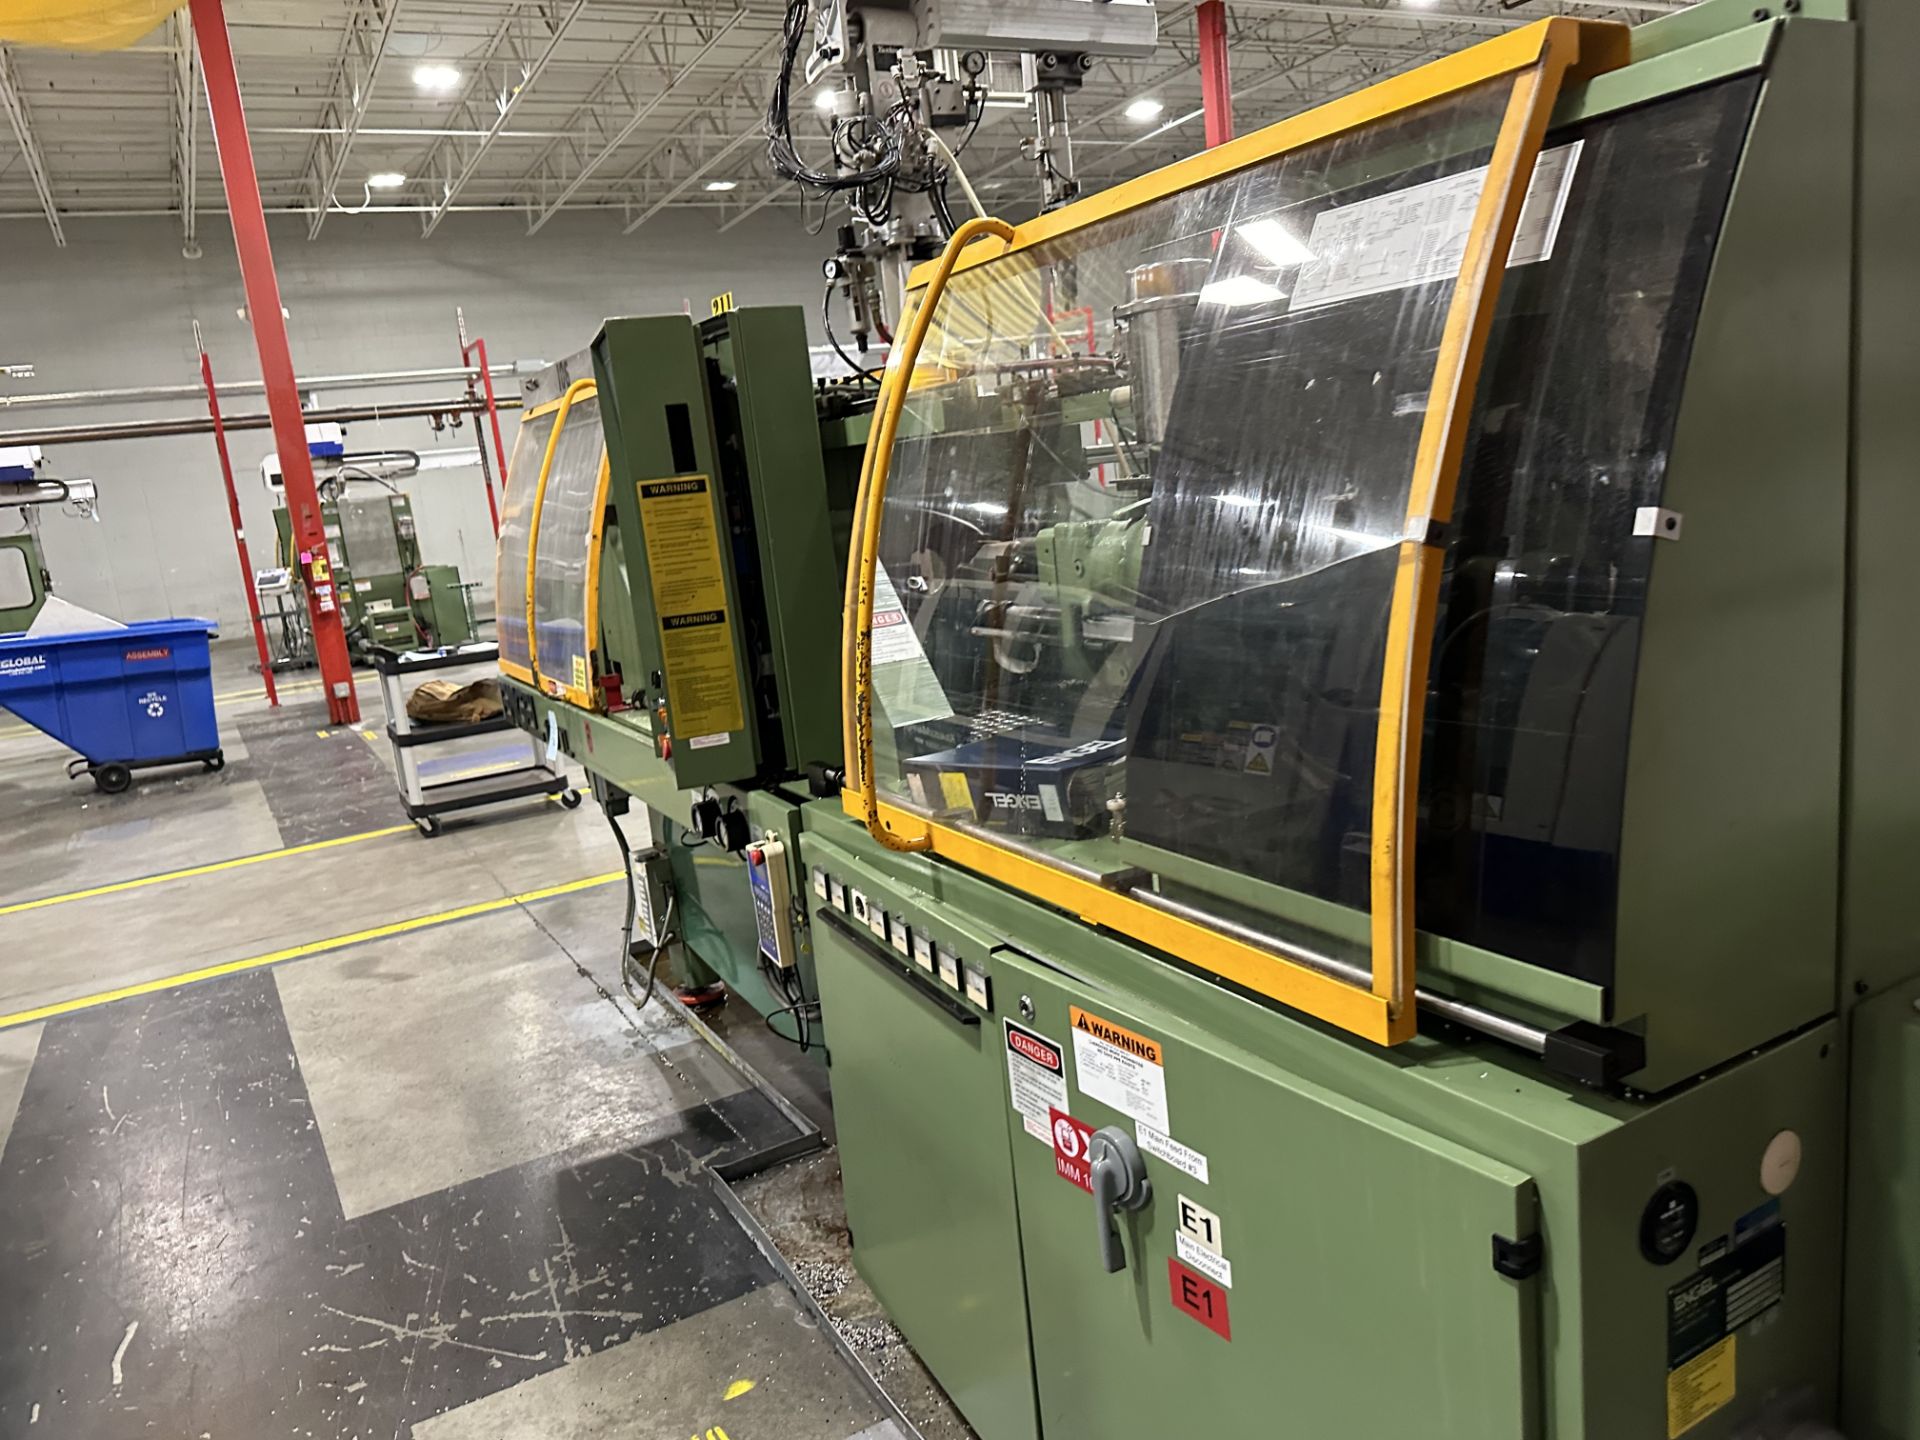 Engel 100 TL Injection Molding Machine - Image 6 of 7